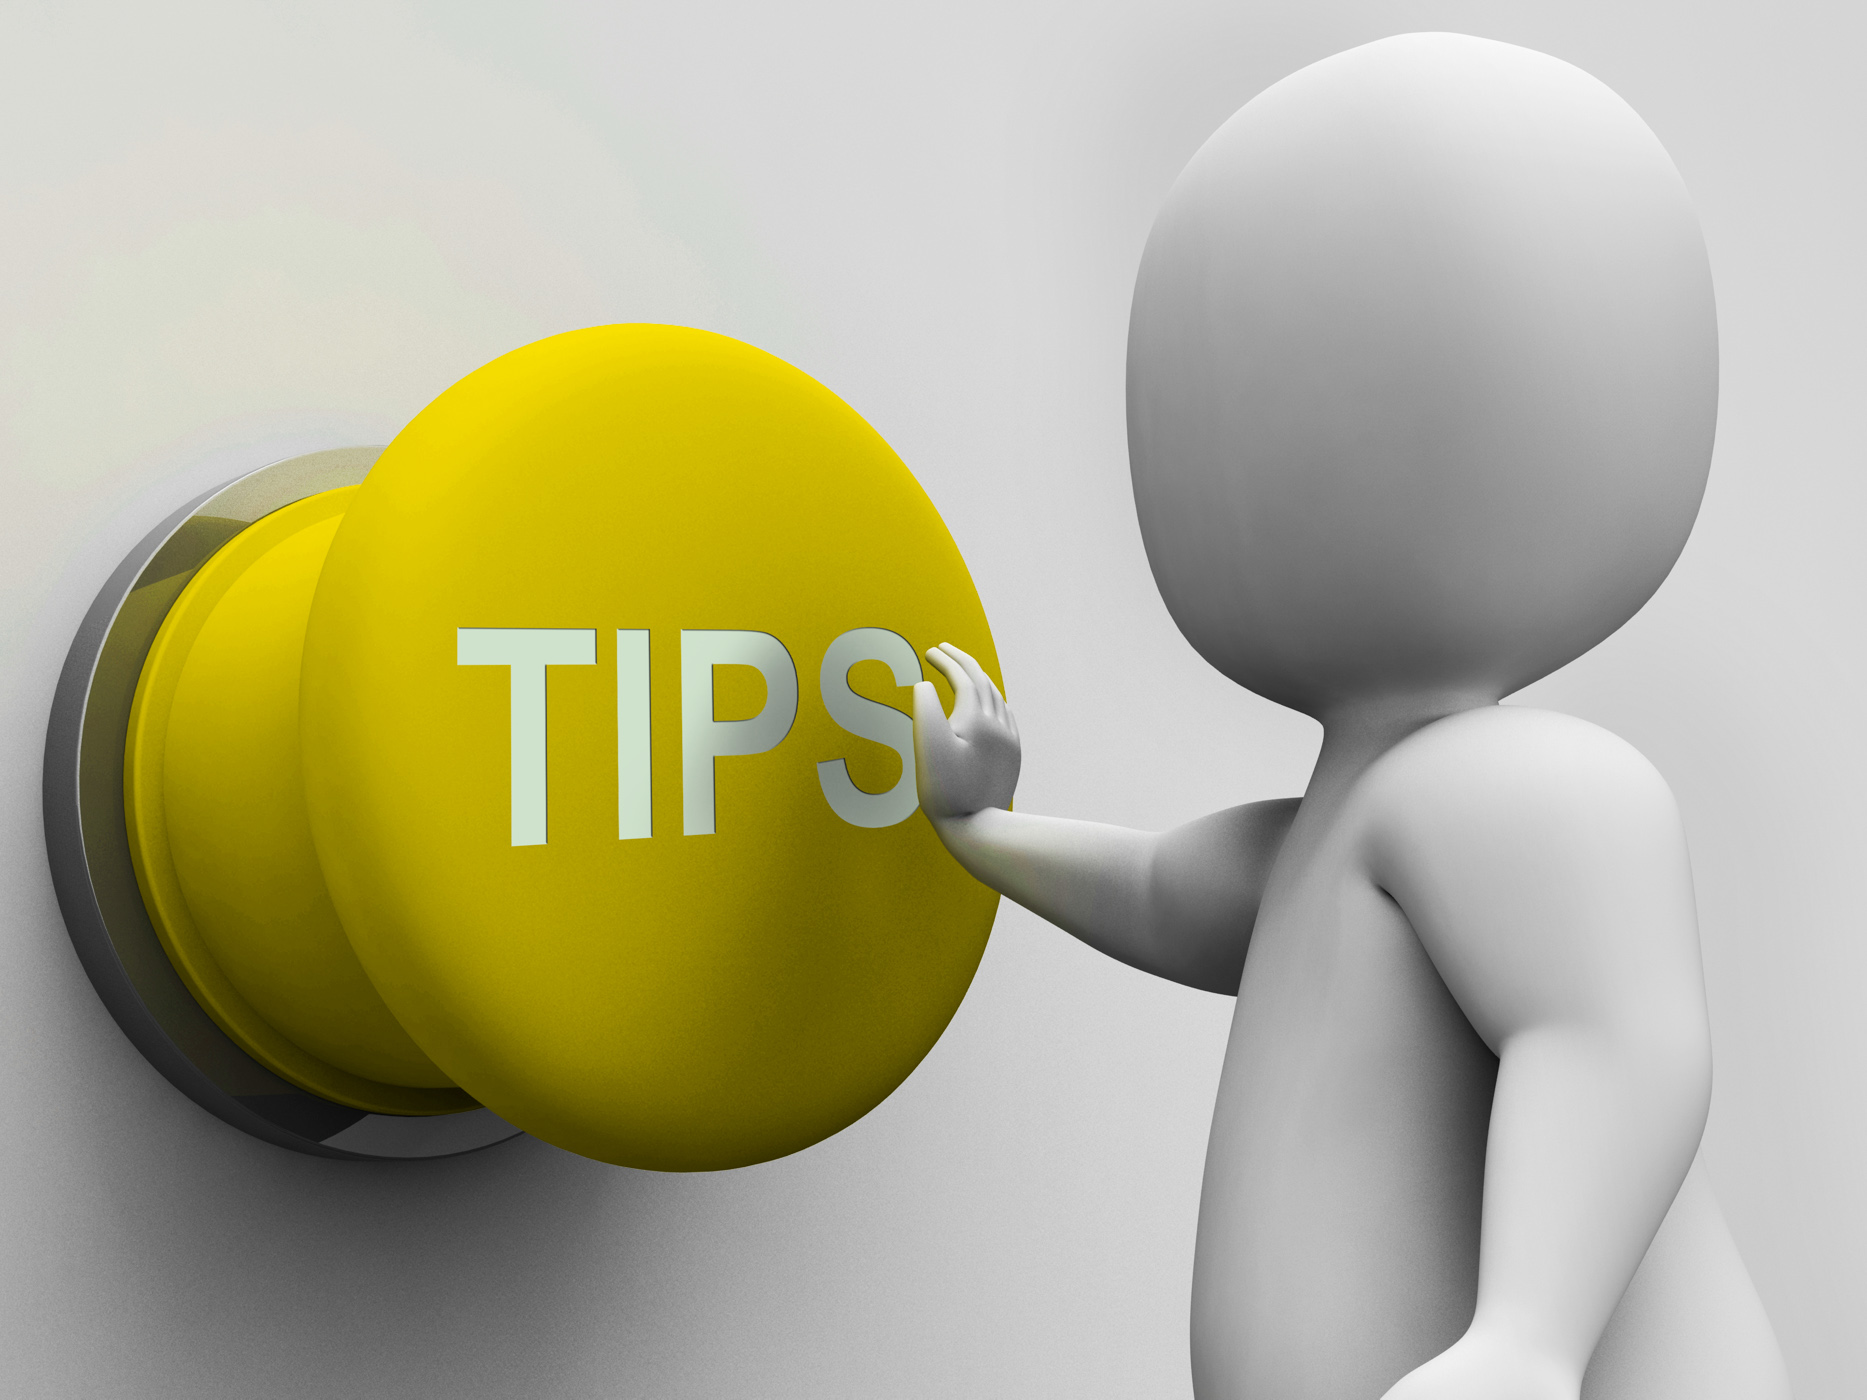 Tips button shows hints guidance and advice photo